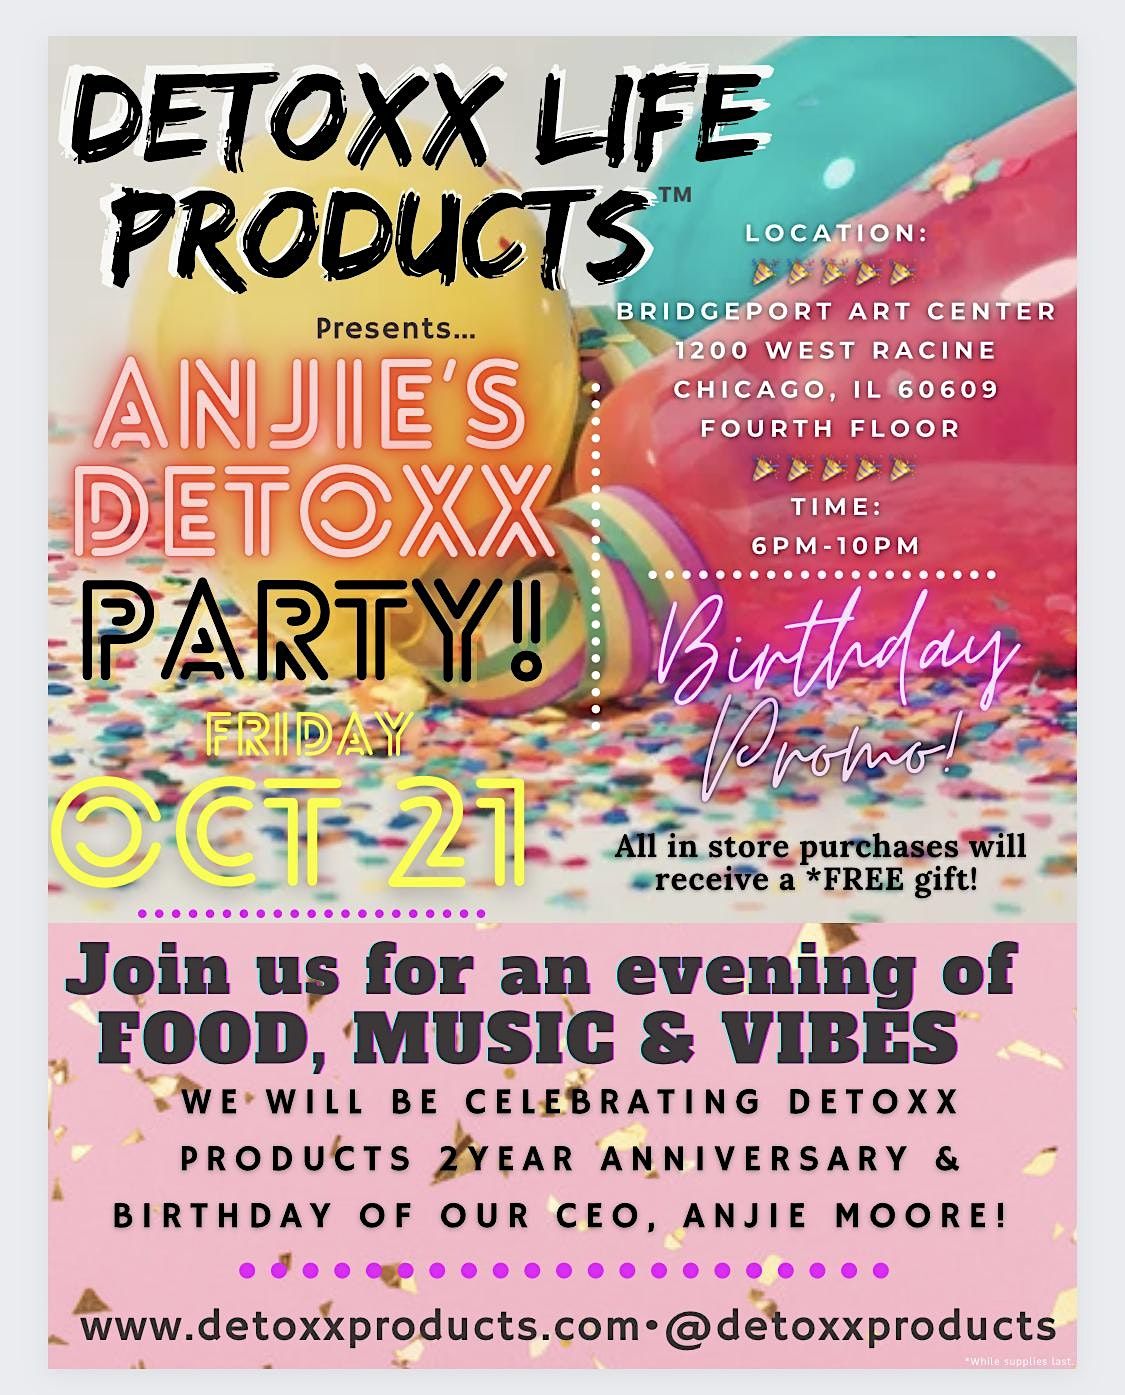 DETOXX PRODUCTS 2-YEAR ANNIVERSARY!